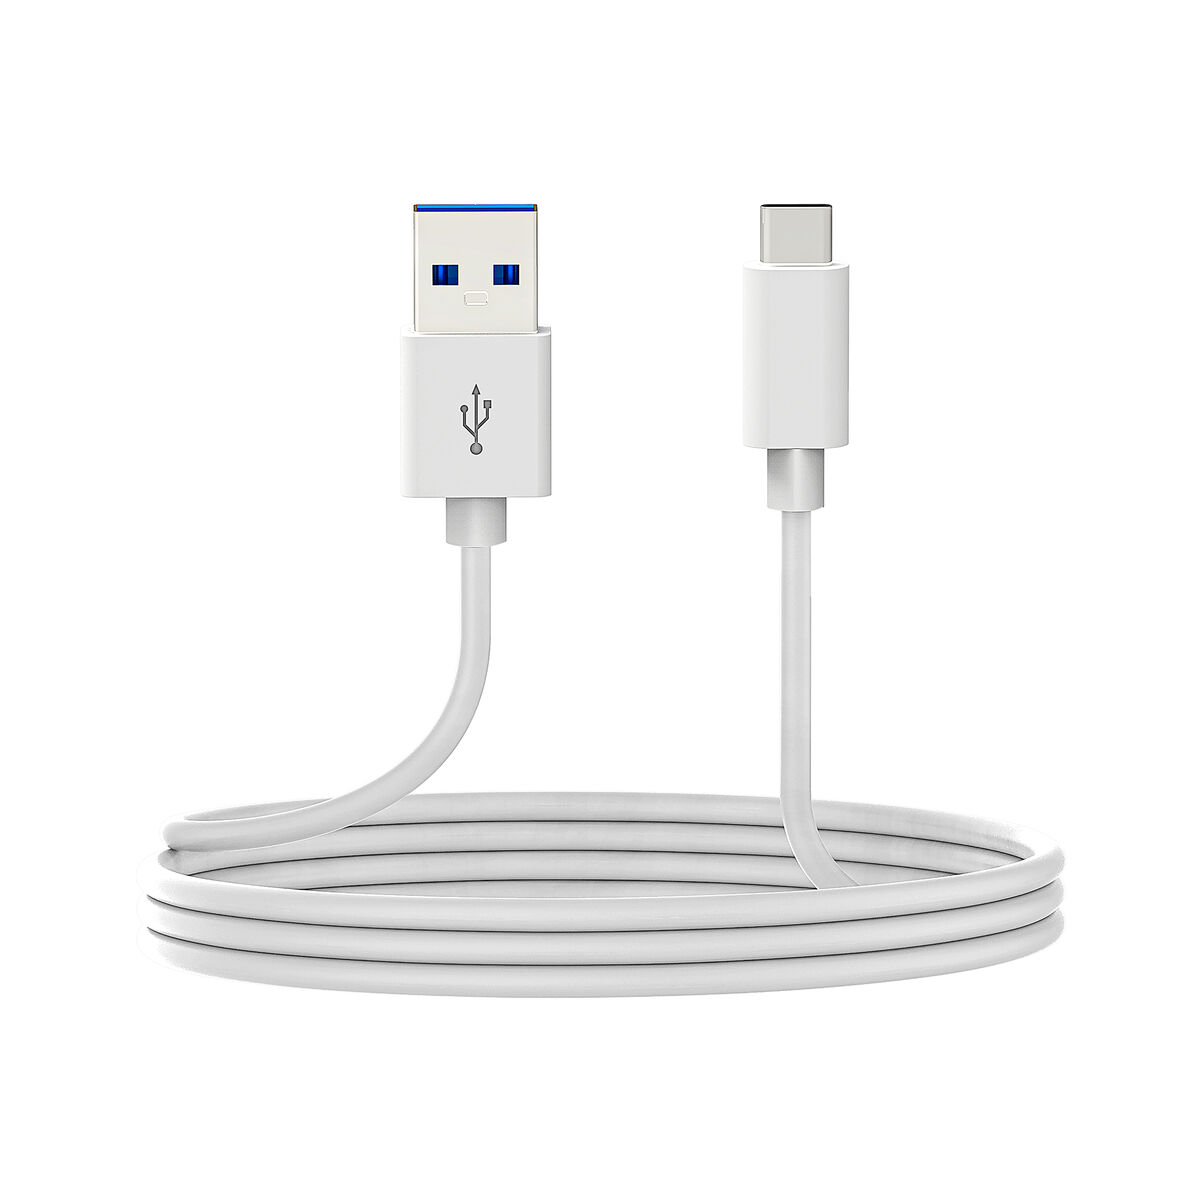 USB A to USB C Cable DCU 30402065 White